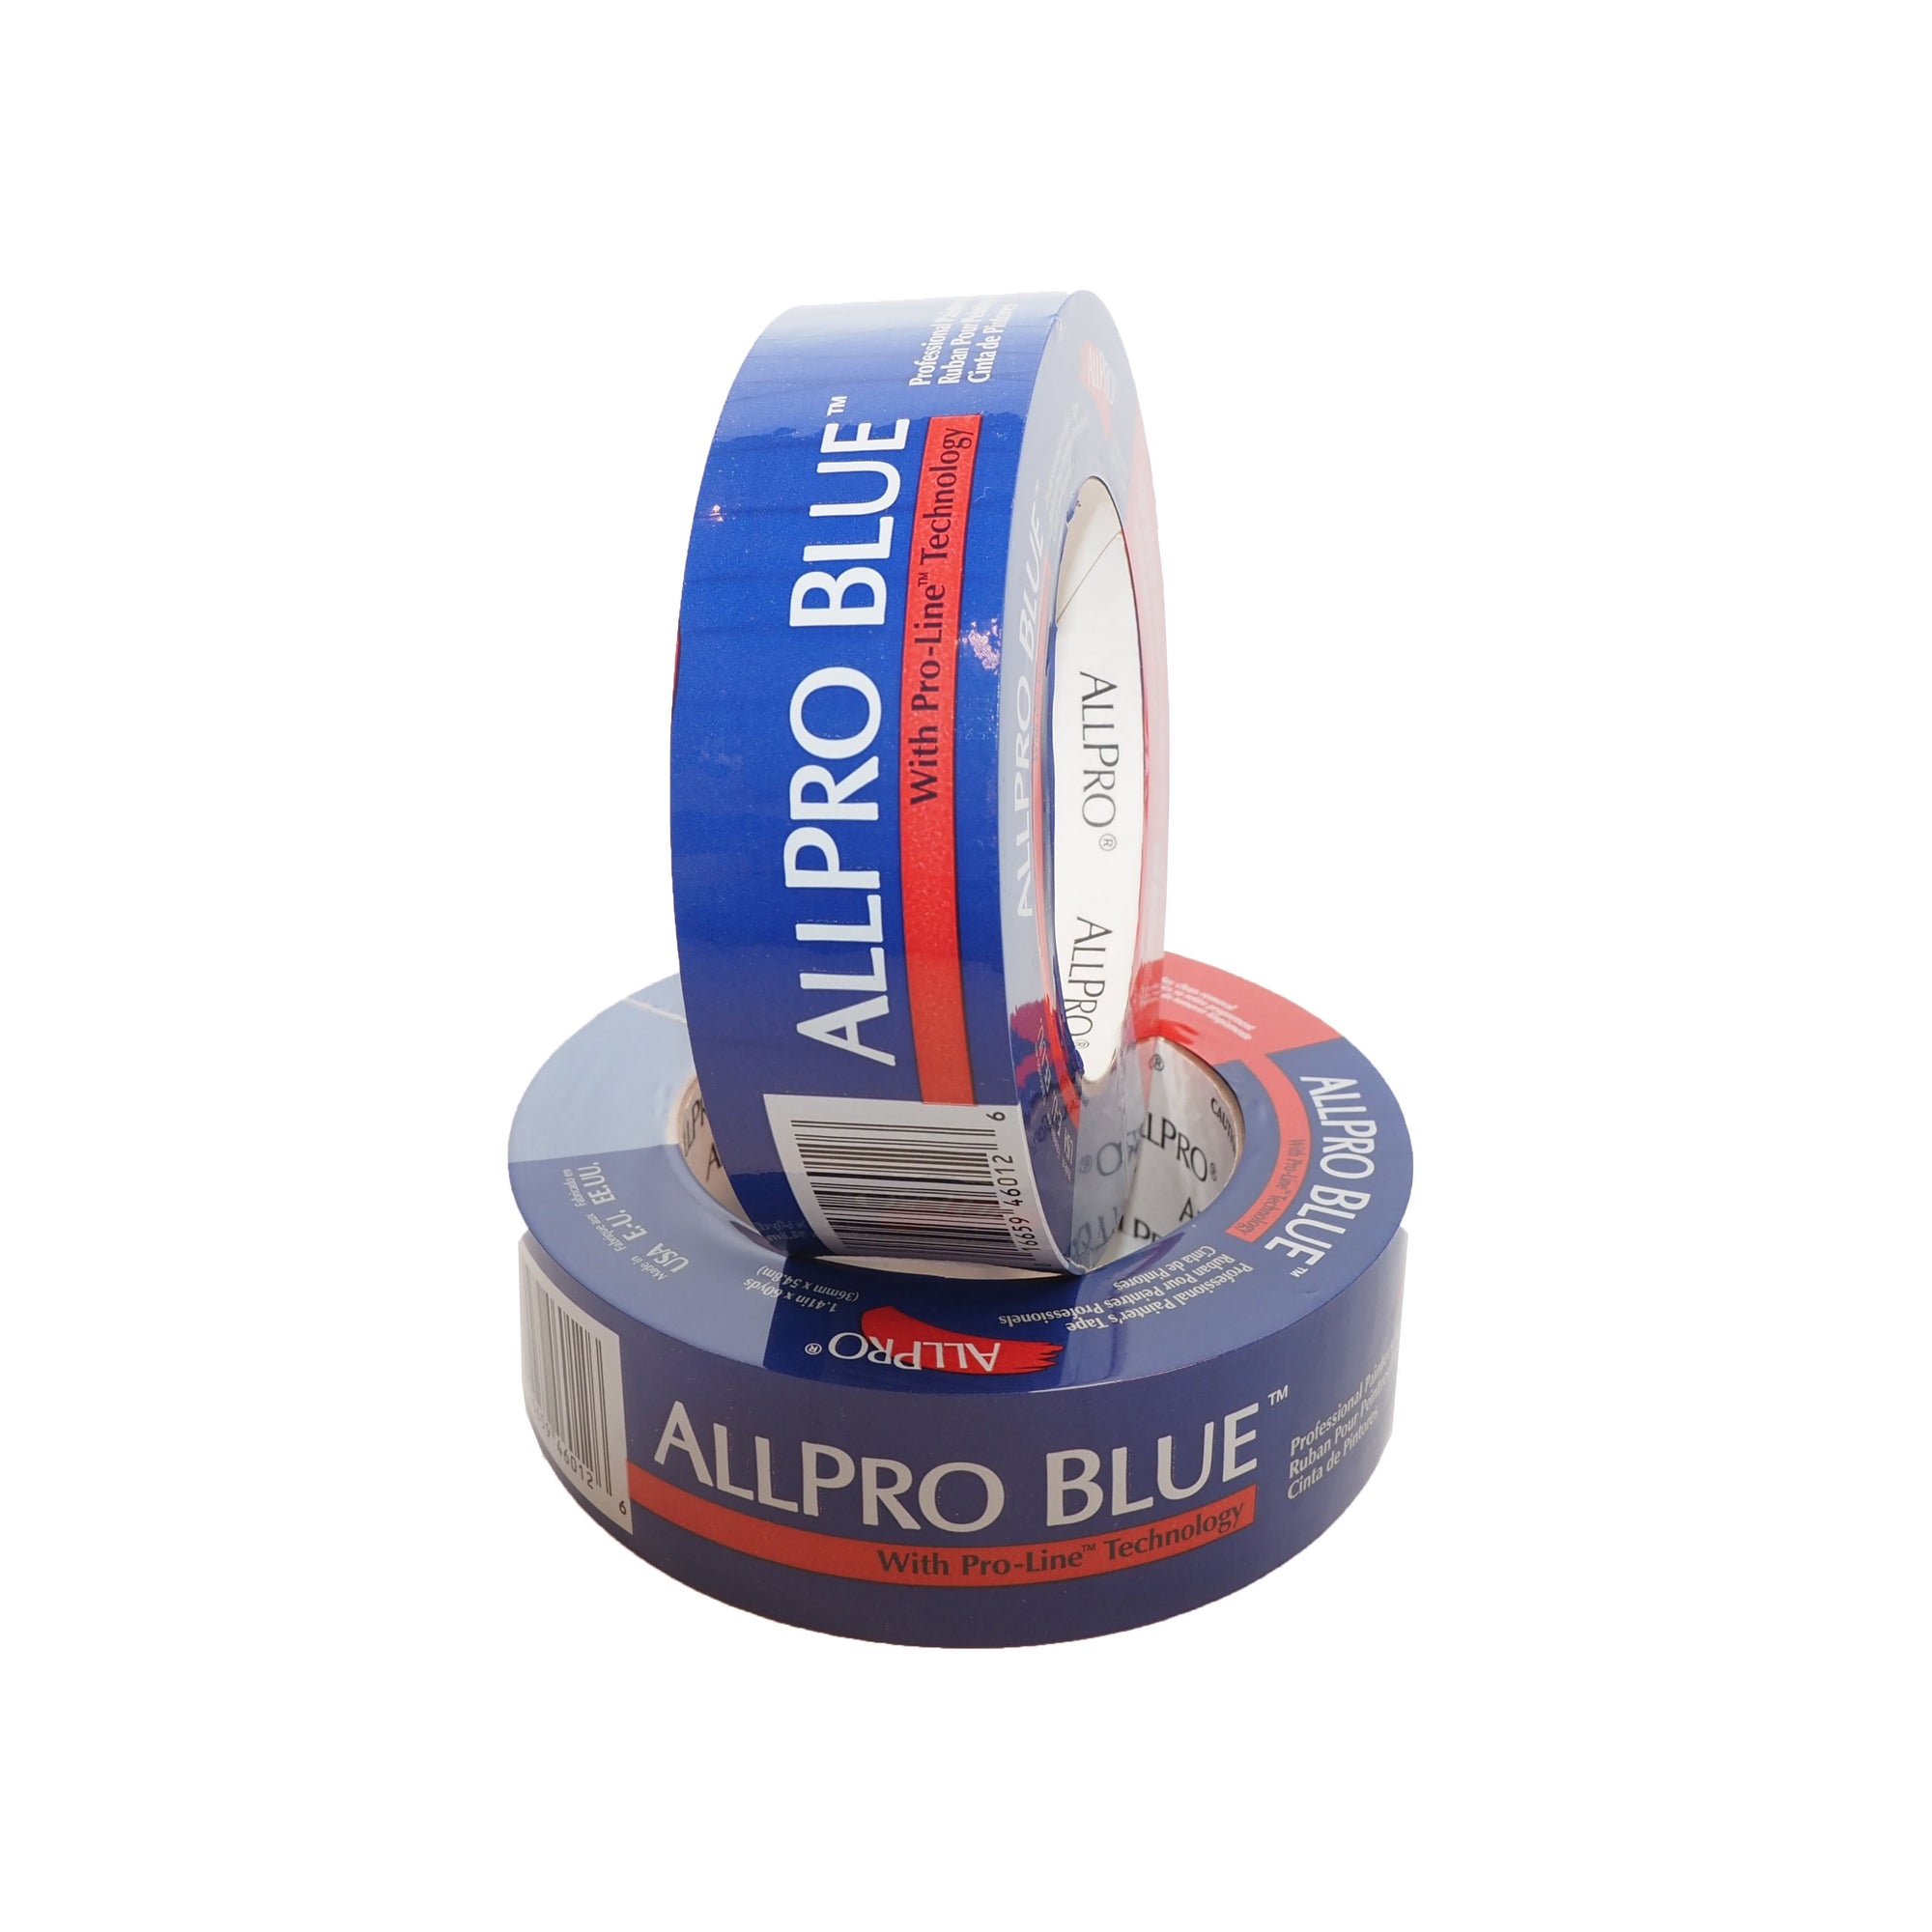 Allpro Blue Masking Tape, available at Catalina Paints in Los Angeles County, CA.